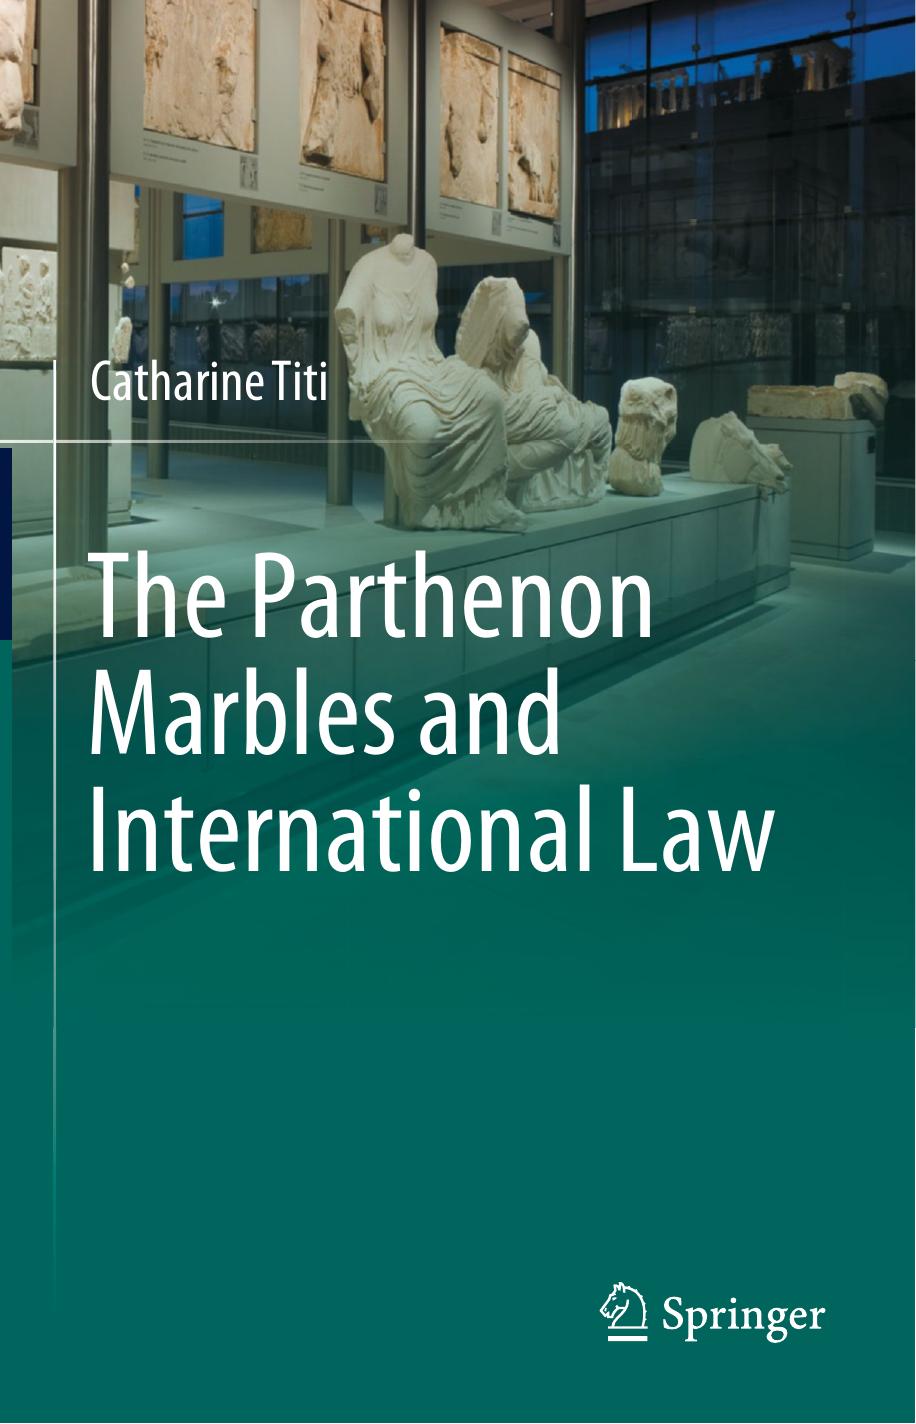 The Parthenon Marbles and International Law by Catharine Titi